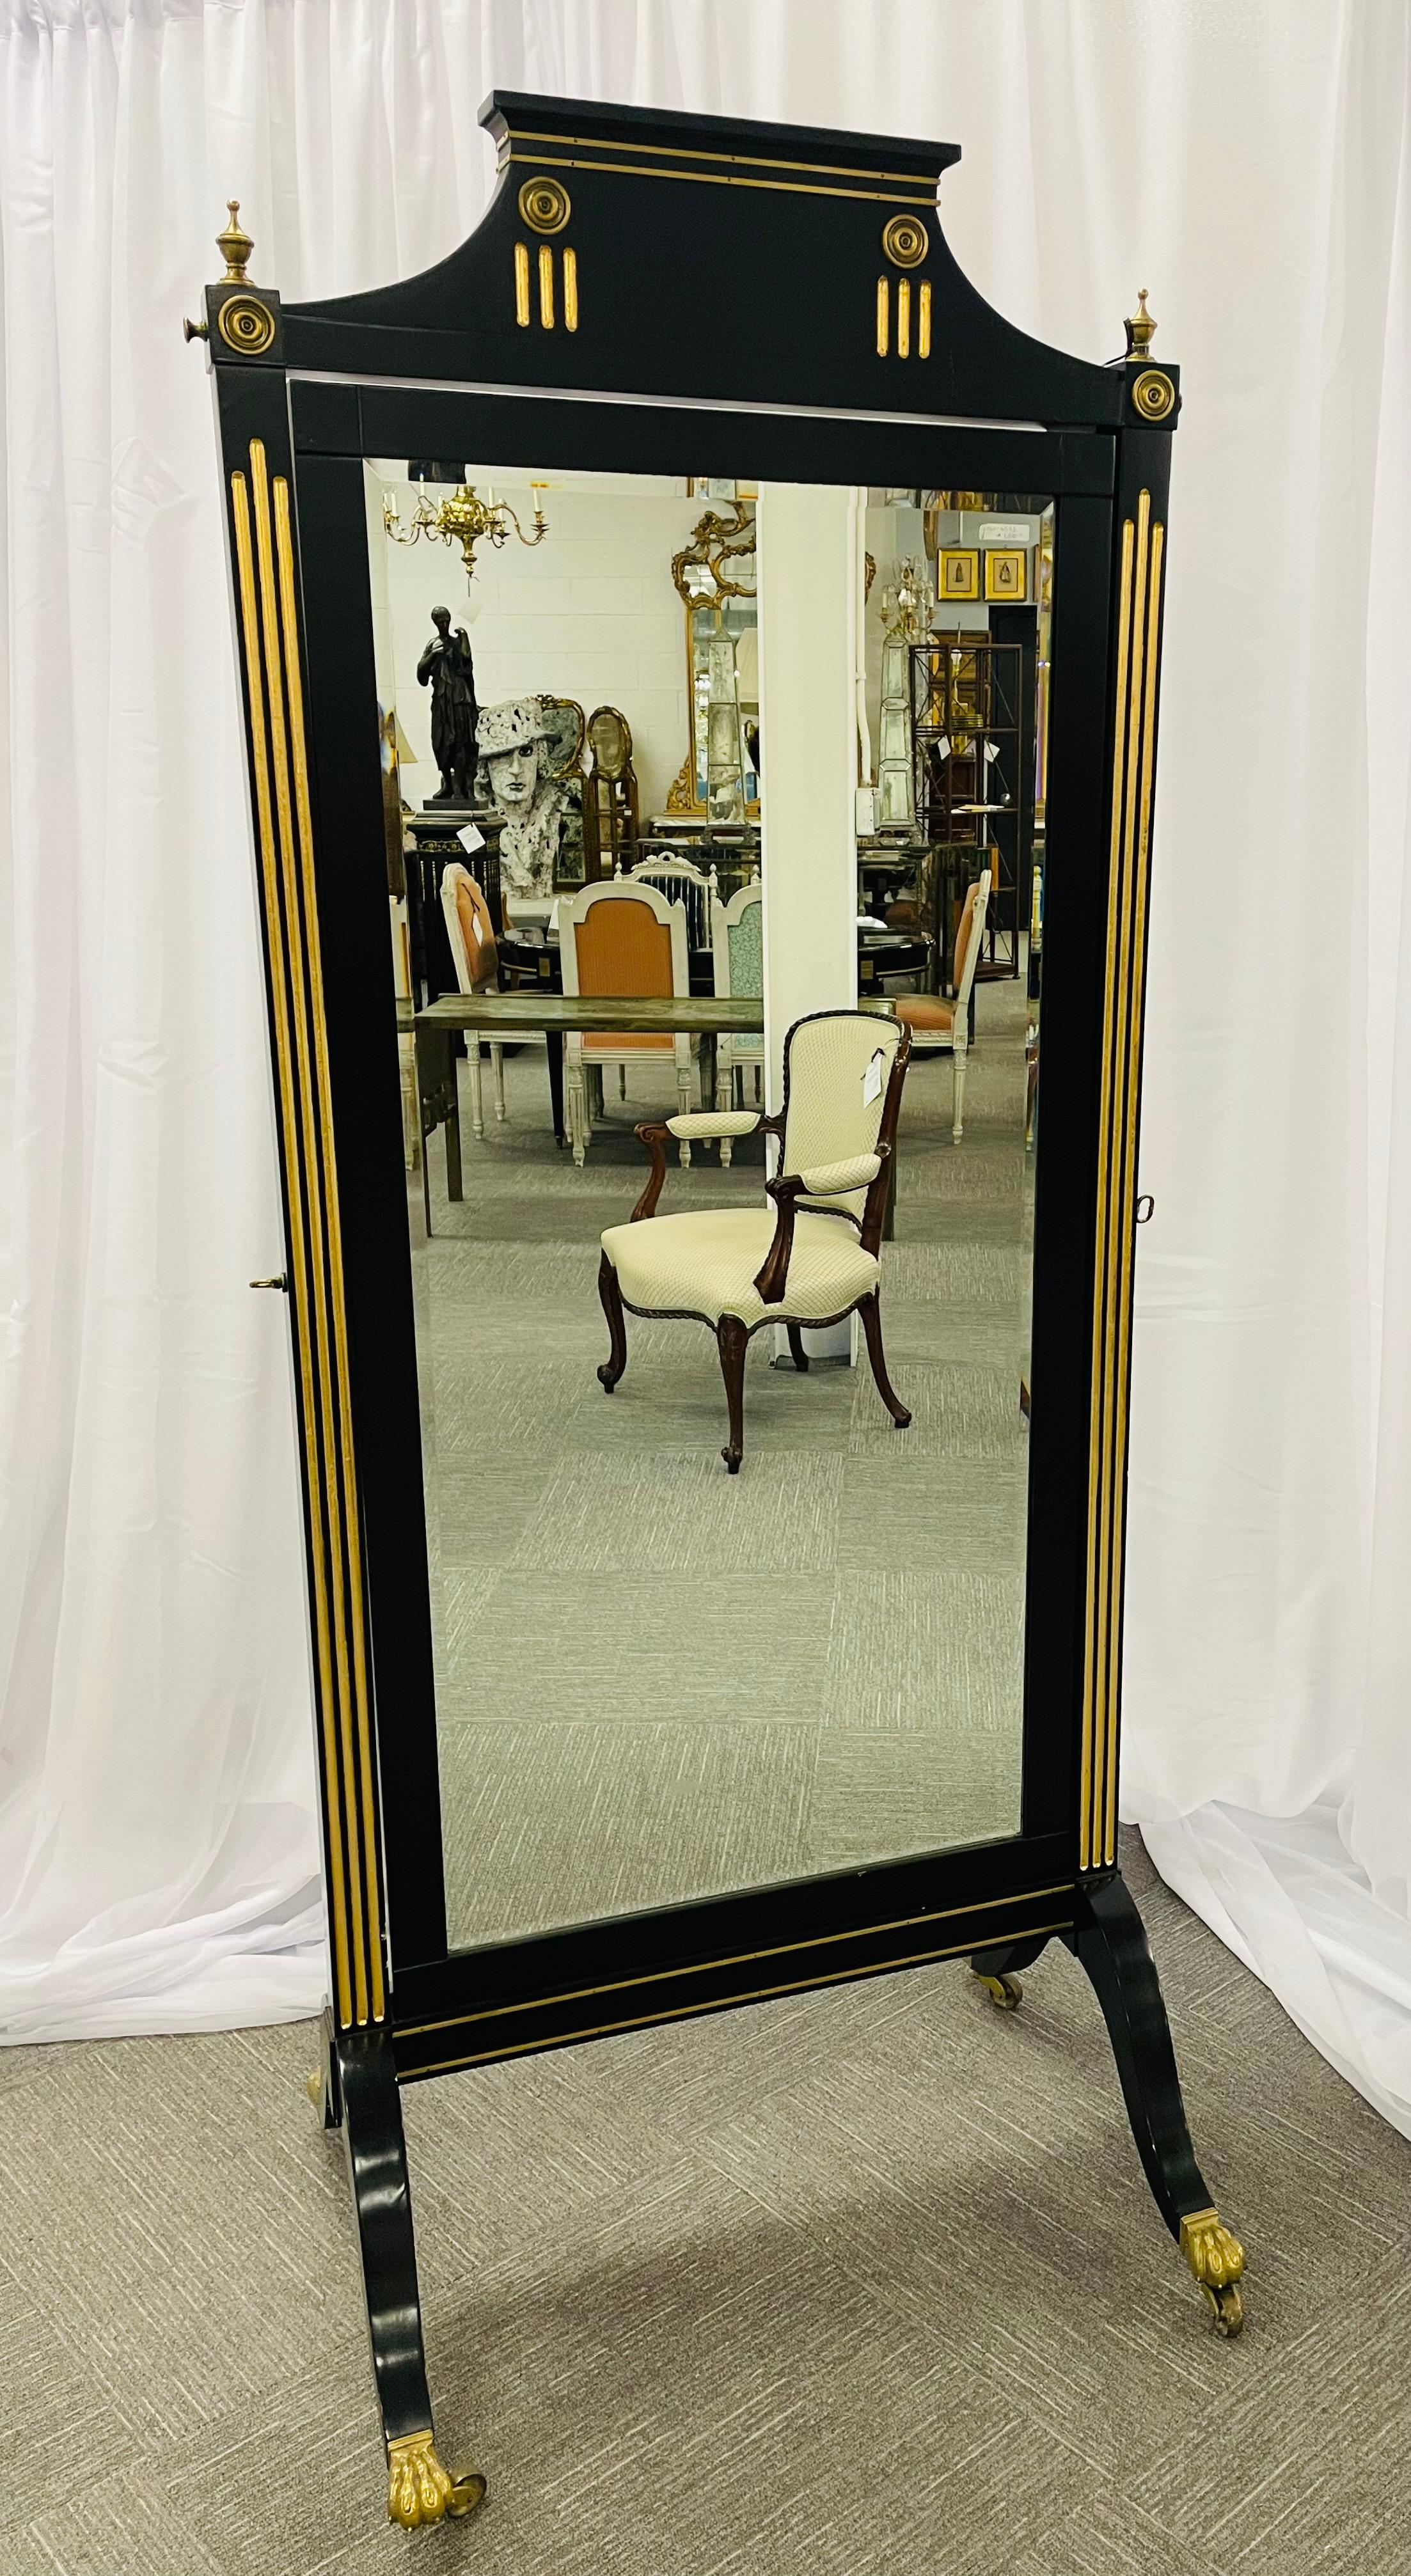 A one of a kind ebonized Maison Jansen cheval mirror. A great Russian neoclassical styled design with bronze claw feet and casters supporting a gilt gold and bronze-mounted wood frame support to hold a center framed beveled mirror. The overall piece